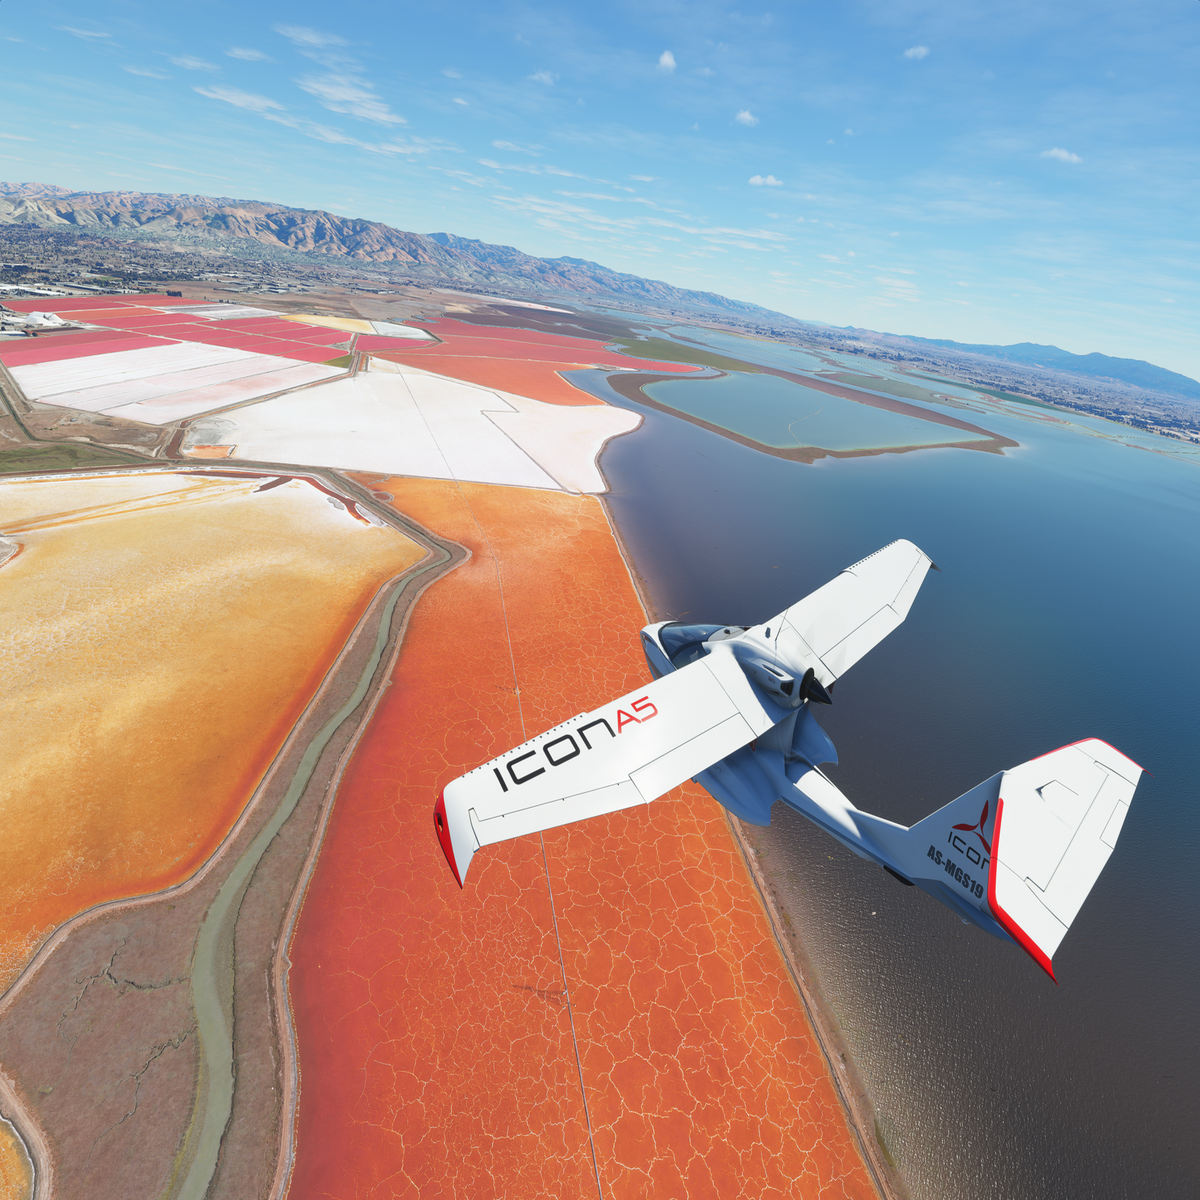 Microsoft Flight Simulator to get an extended 40th-anniversary edition